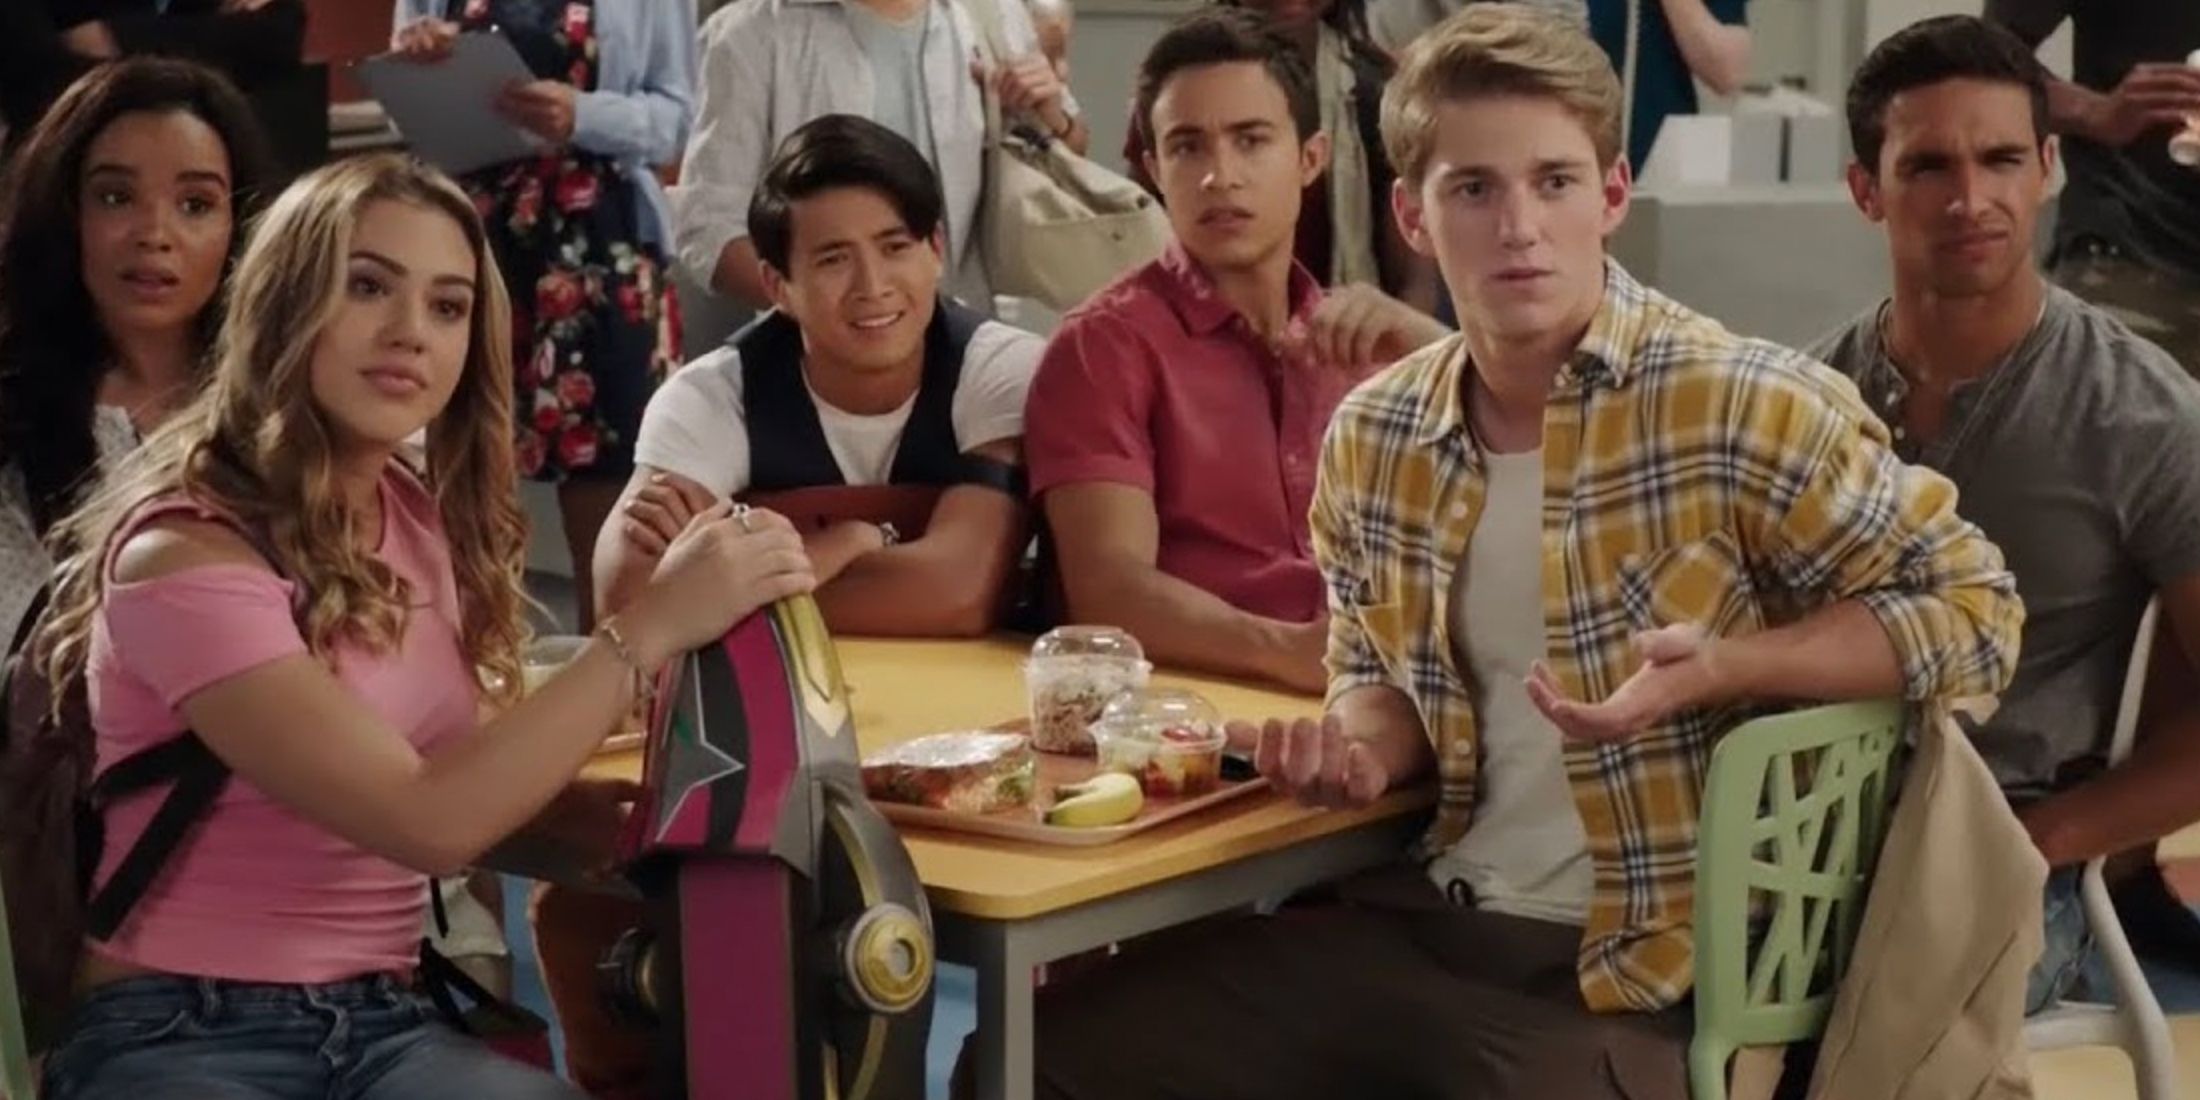 Power Rangers Ninja Steel team members sit together at a cafeteria lunch table